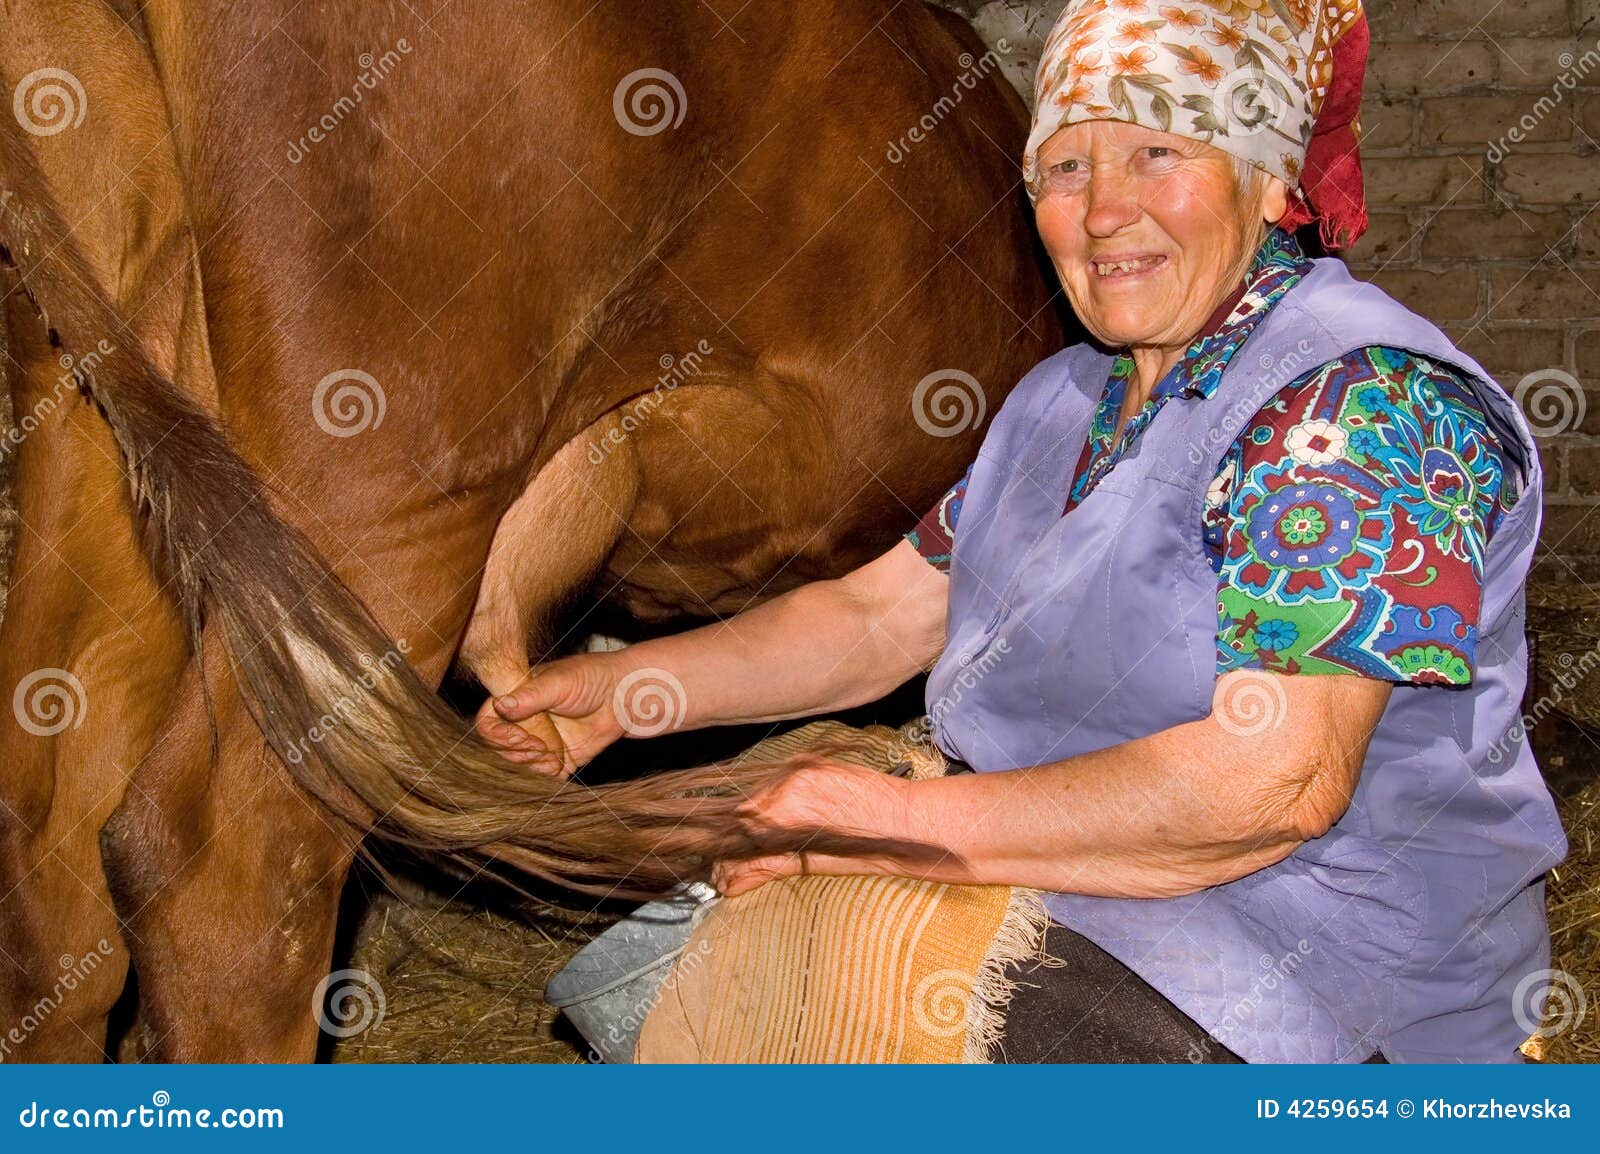 old woman milk a cow